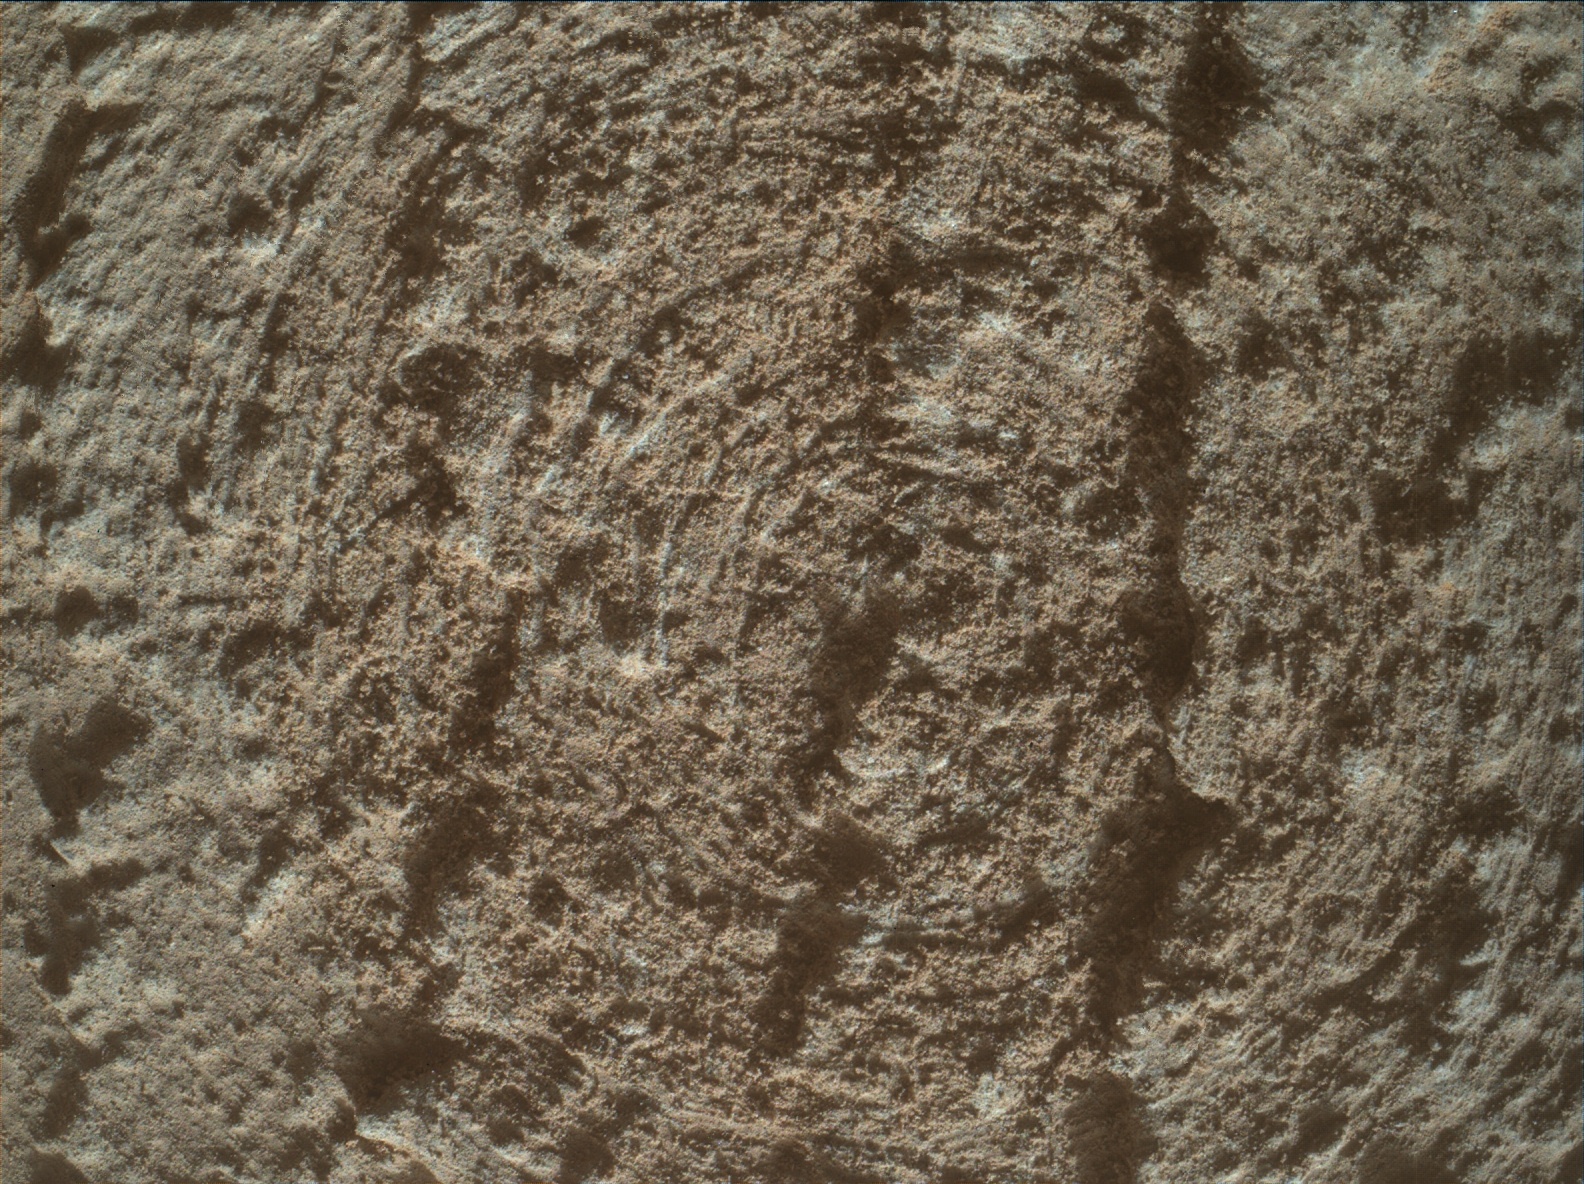 Nasa's Mars rover Curiosity acquired this image using its Mars Hand Lens Imager (MAHLI) on Sol 3774